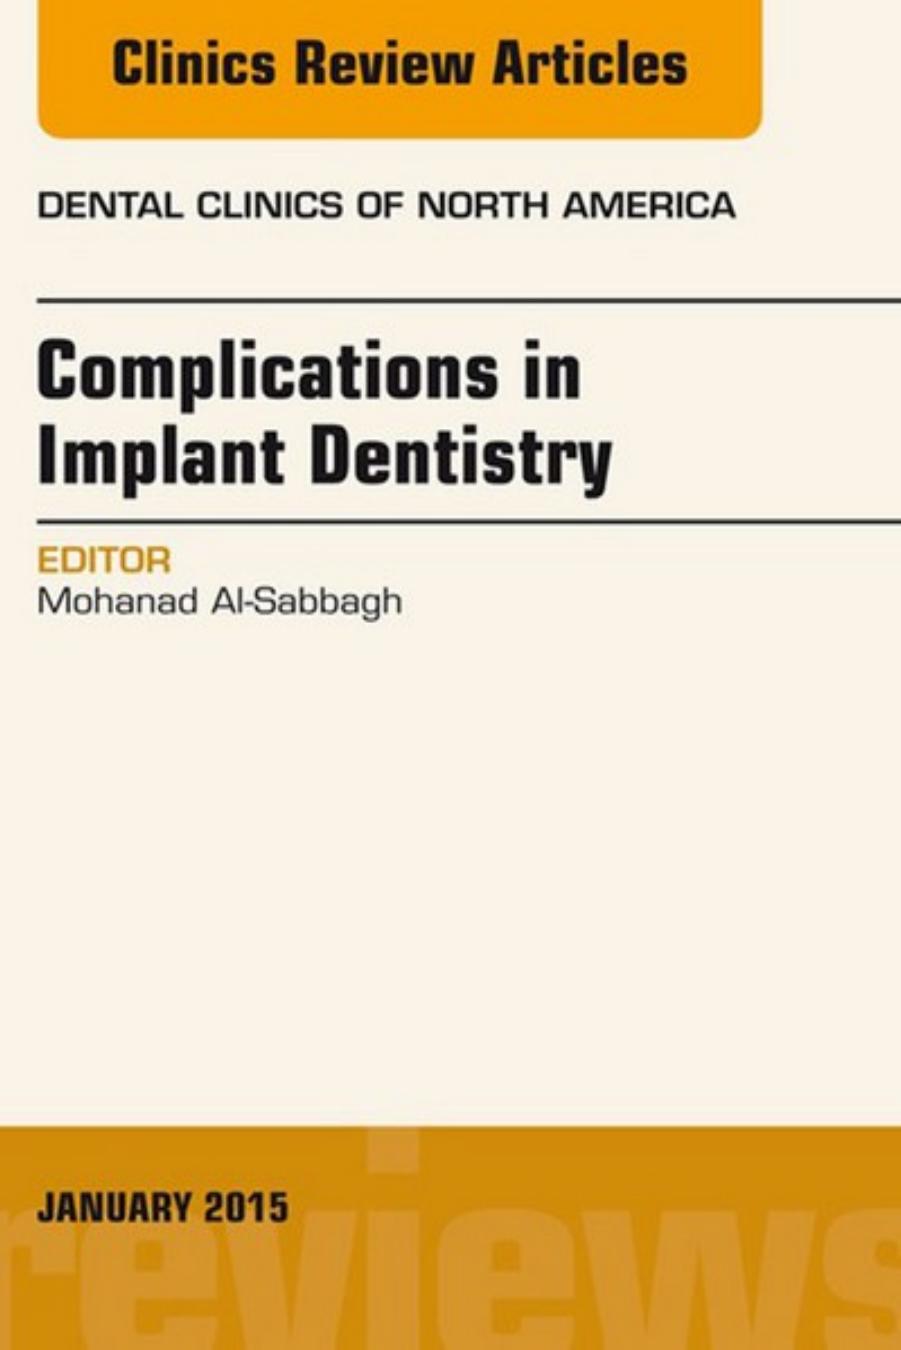 Complications in Implant Dentistry, an Issue of Dental Clinics of North America.jpg